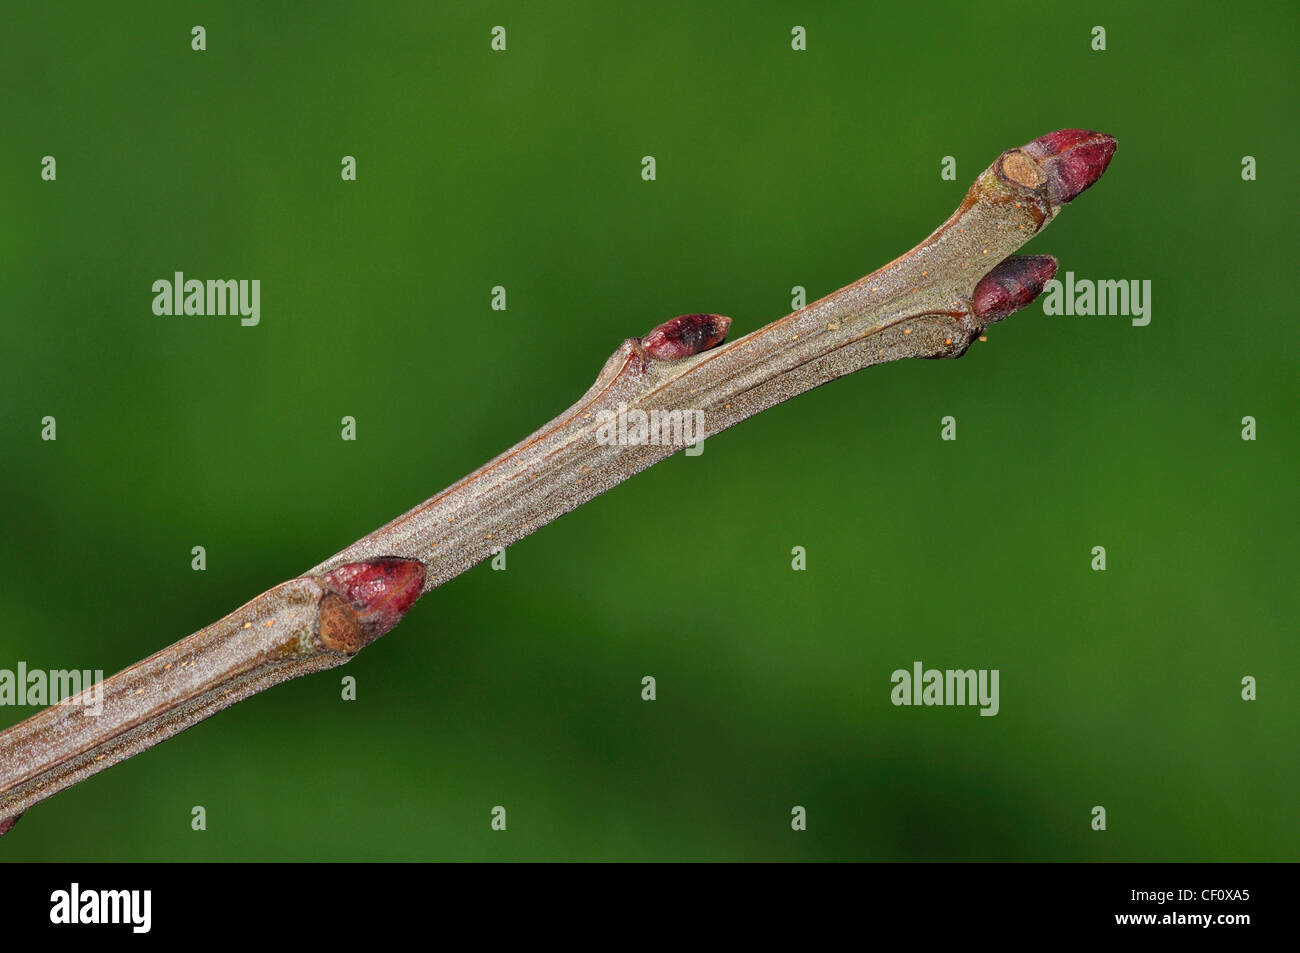 Sweet chestnut twig showing buds in winter. Dorset, UK January 2012 Stock Photo